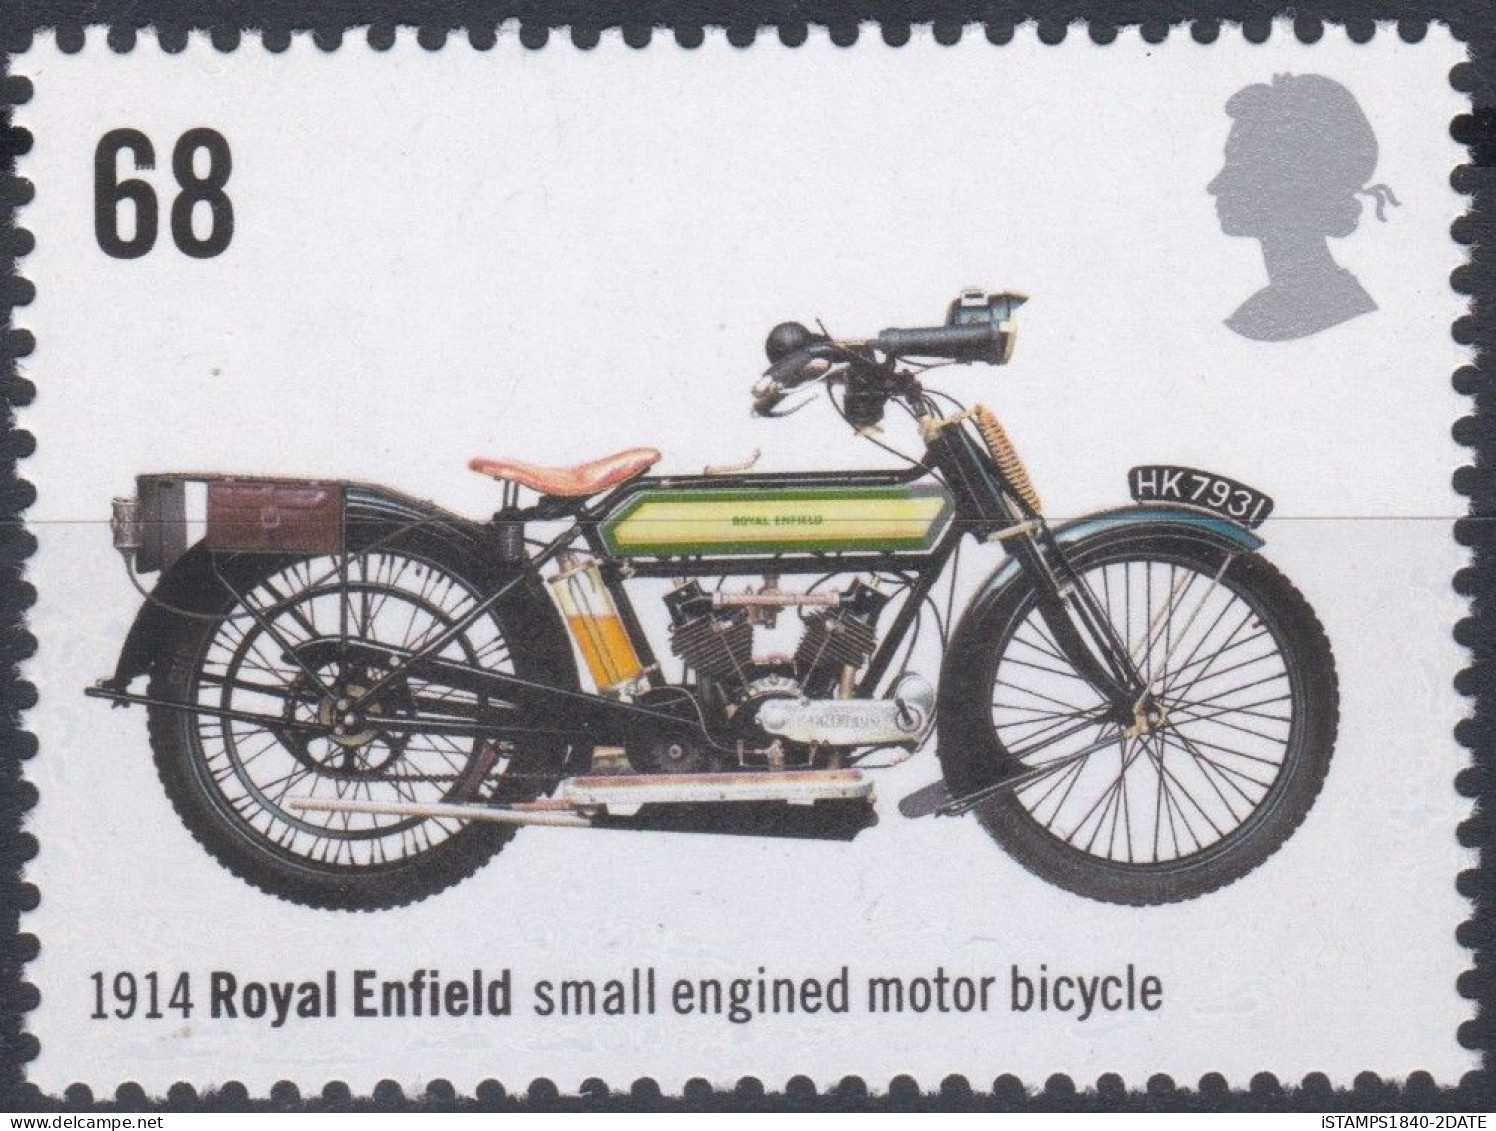 00865/Great Britain 2005 Sg2553 68p Multicoloured MNH Royal Enfield, Small Engined Motor Bicycle (1914) - Motorbikes